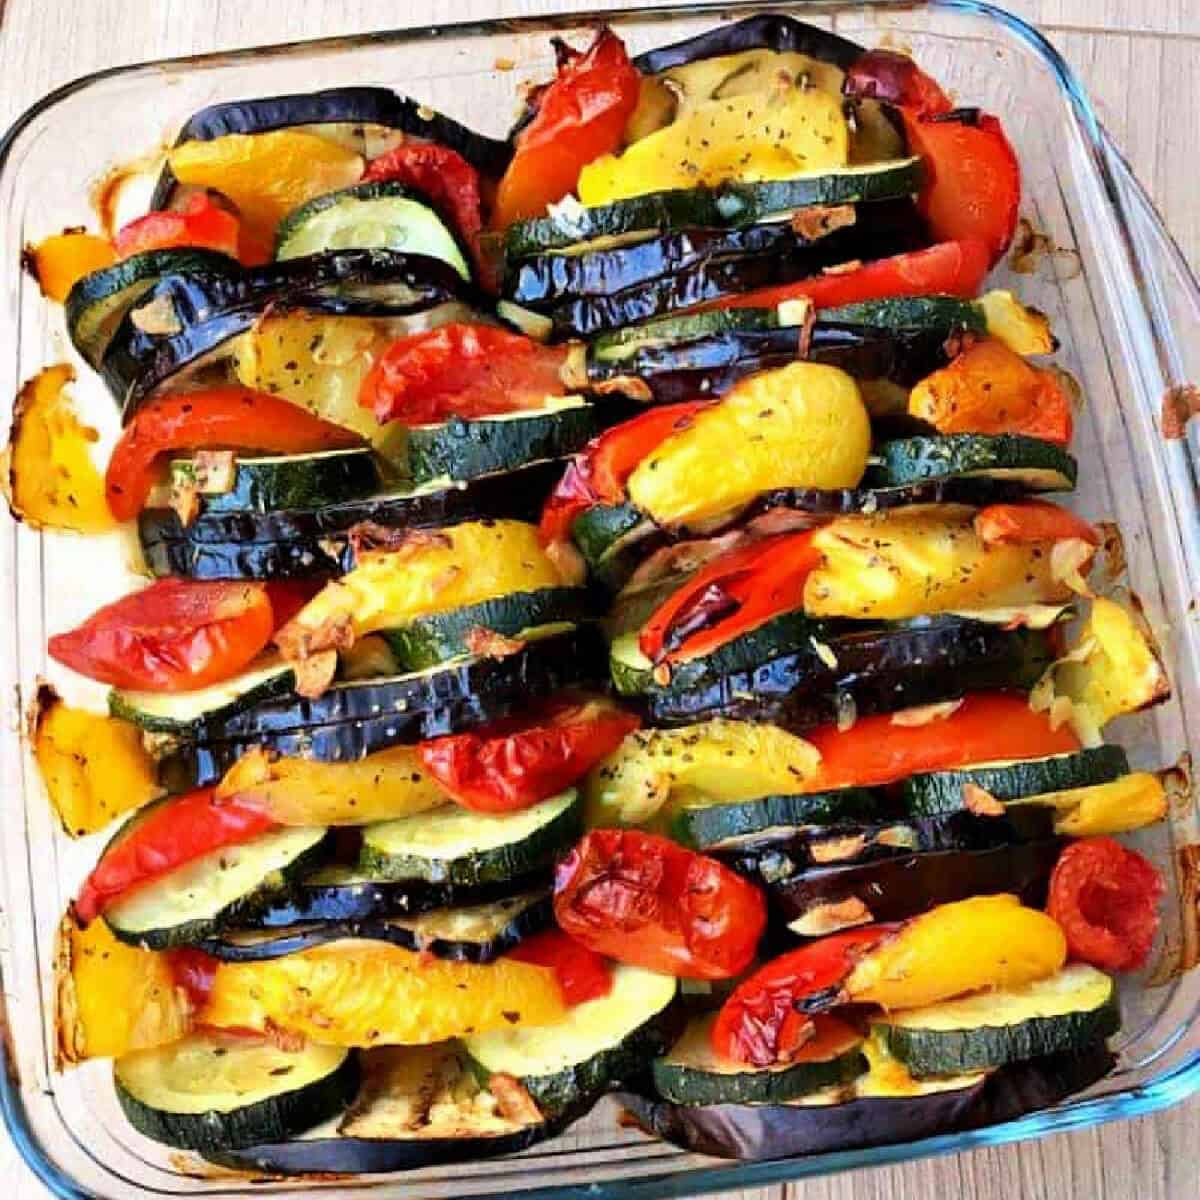 Peppers, aubergines and tomatoes in a pyrex dish, arranged in a pattern.